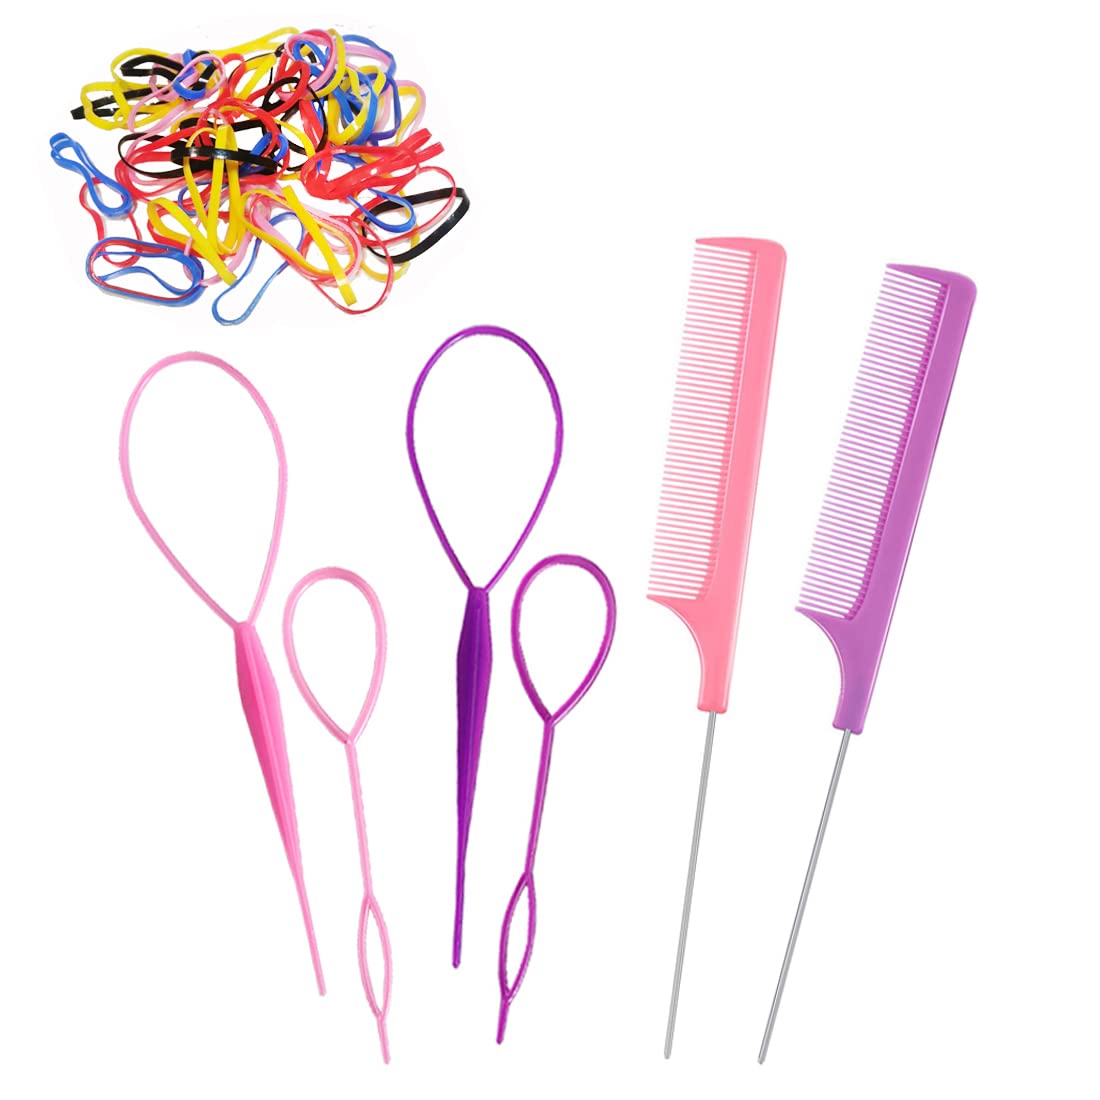 Topsy Tail Hair Tools, 106pcs Hair Styling Tools for Girls, 2pcs Rat Tail  Comb 4pcs French Braiding Tool Hair Loop Styling Tool, 100 Colored Children Rubber  Bands for Children Girls